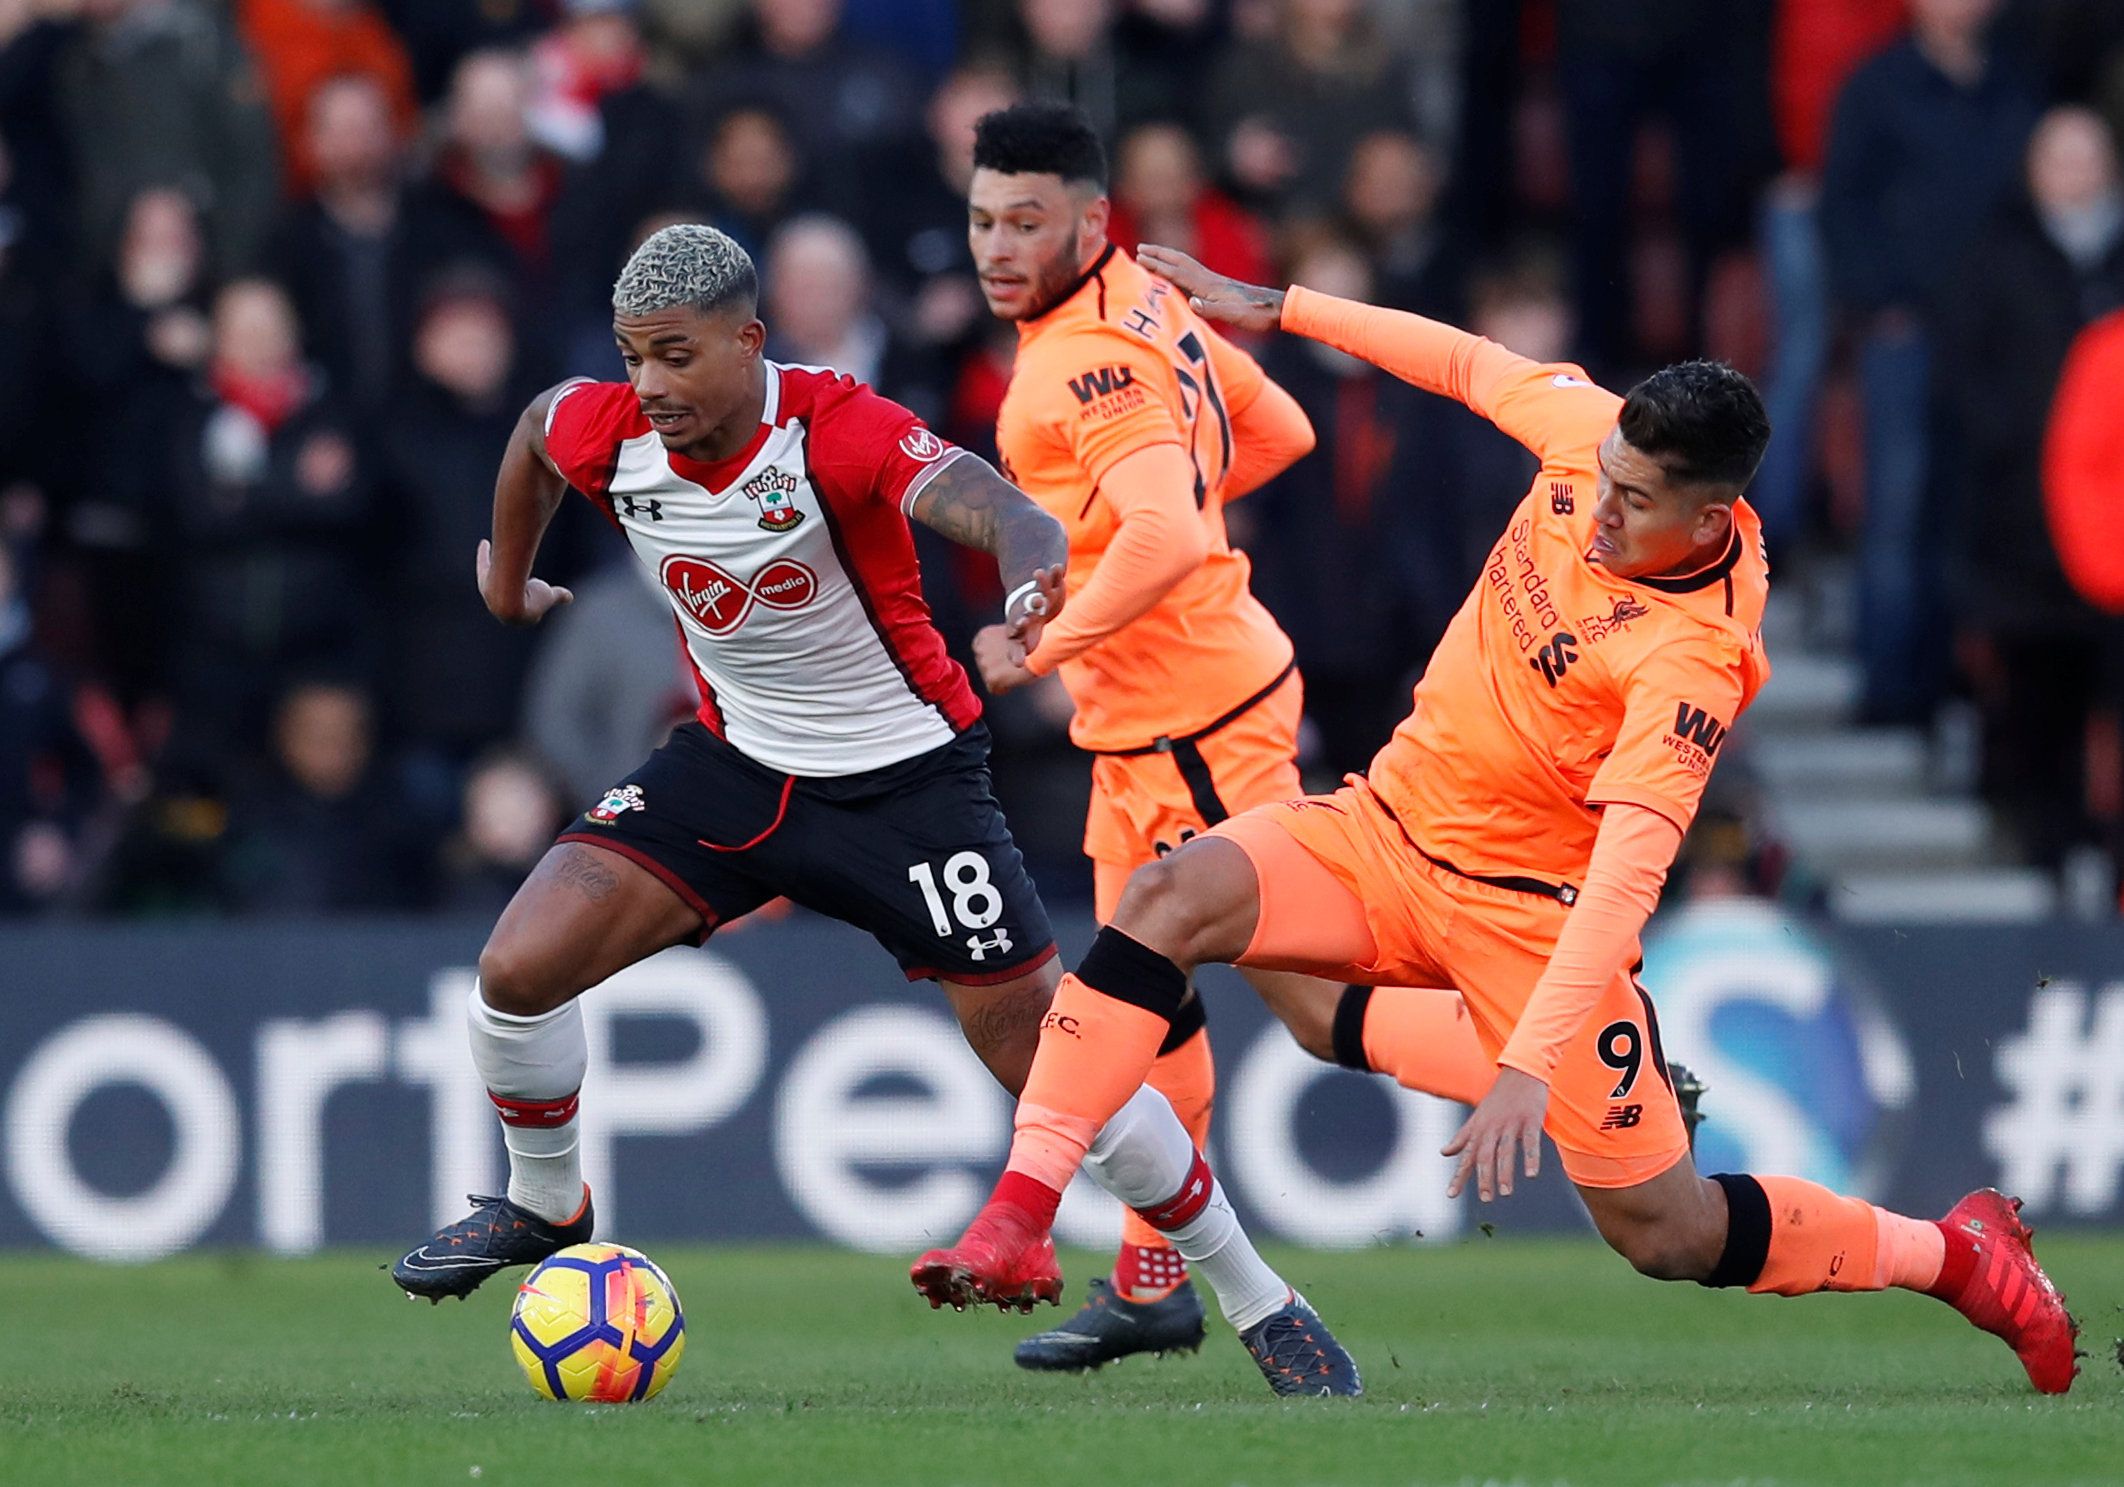 Soccer Football - Premier League - Southampton vs Liverpool - St Mary's Stadium, Southampton, Britain - February 11, 2018   Liverpool's Roberto Firmino in action with Southampton's Mario Lemina    REUTERS/Eddie Keogh    EDITORIAL USE ONLY. No use with unauthorized audio, video, data, fixture lists, club/league logos or 